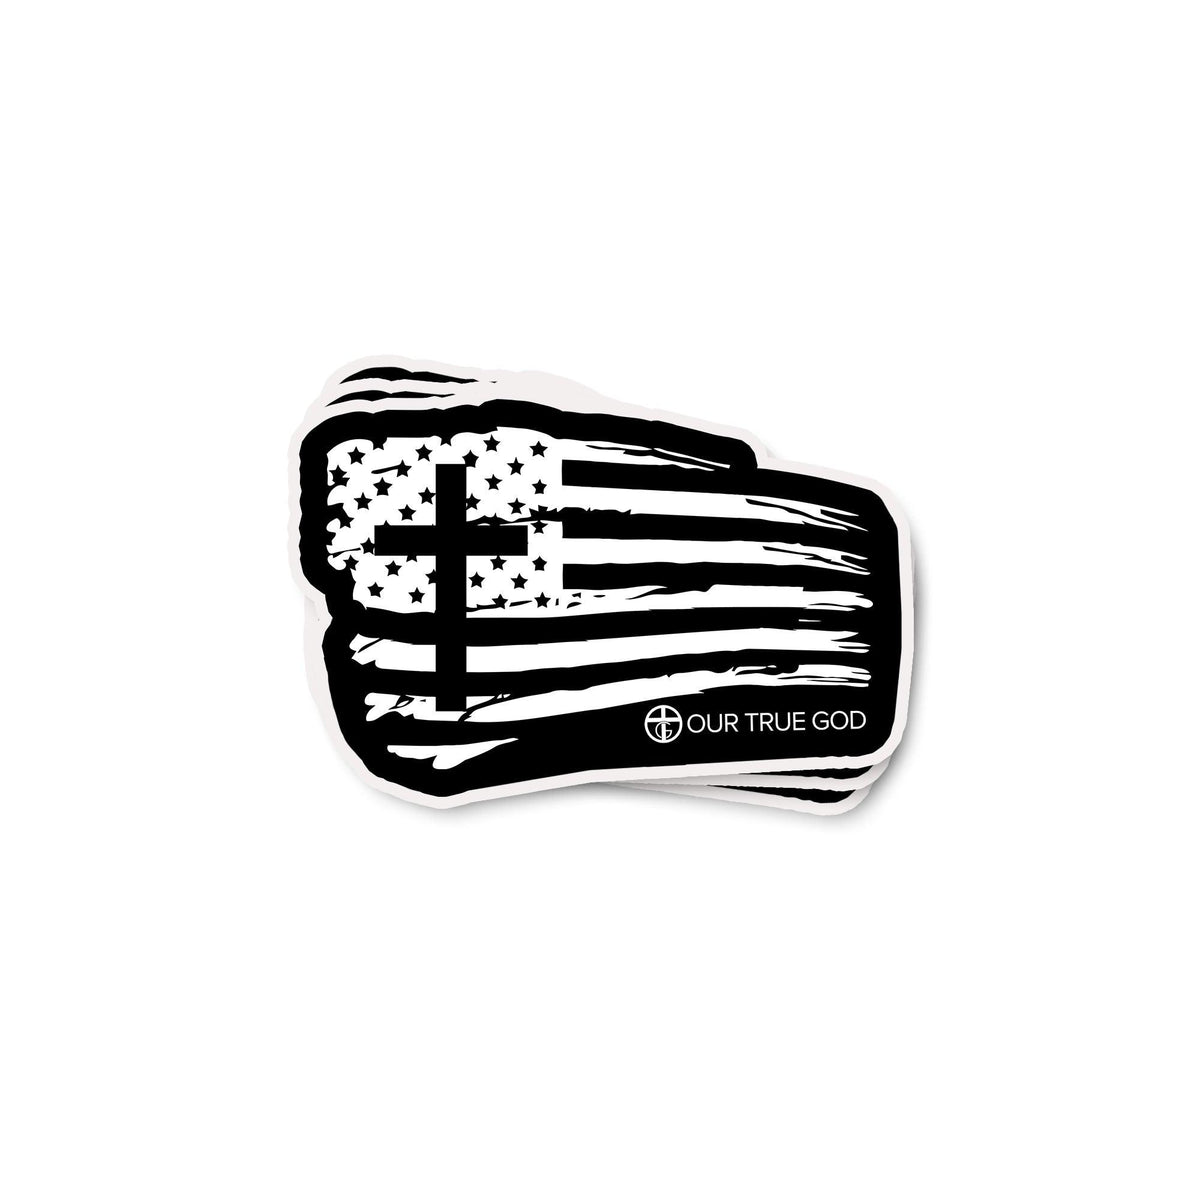 Tattered Flag Decals